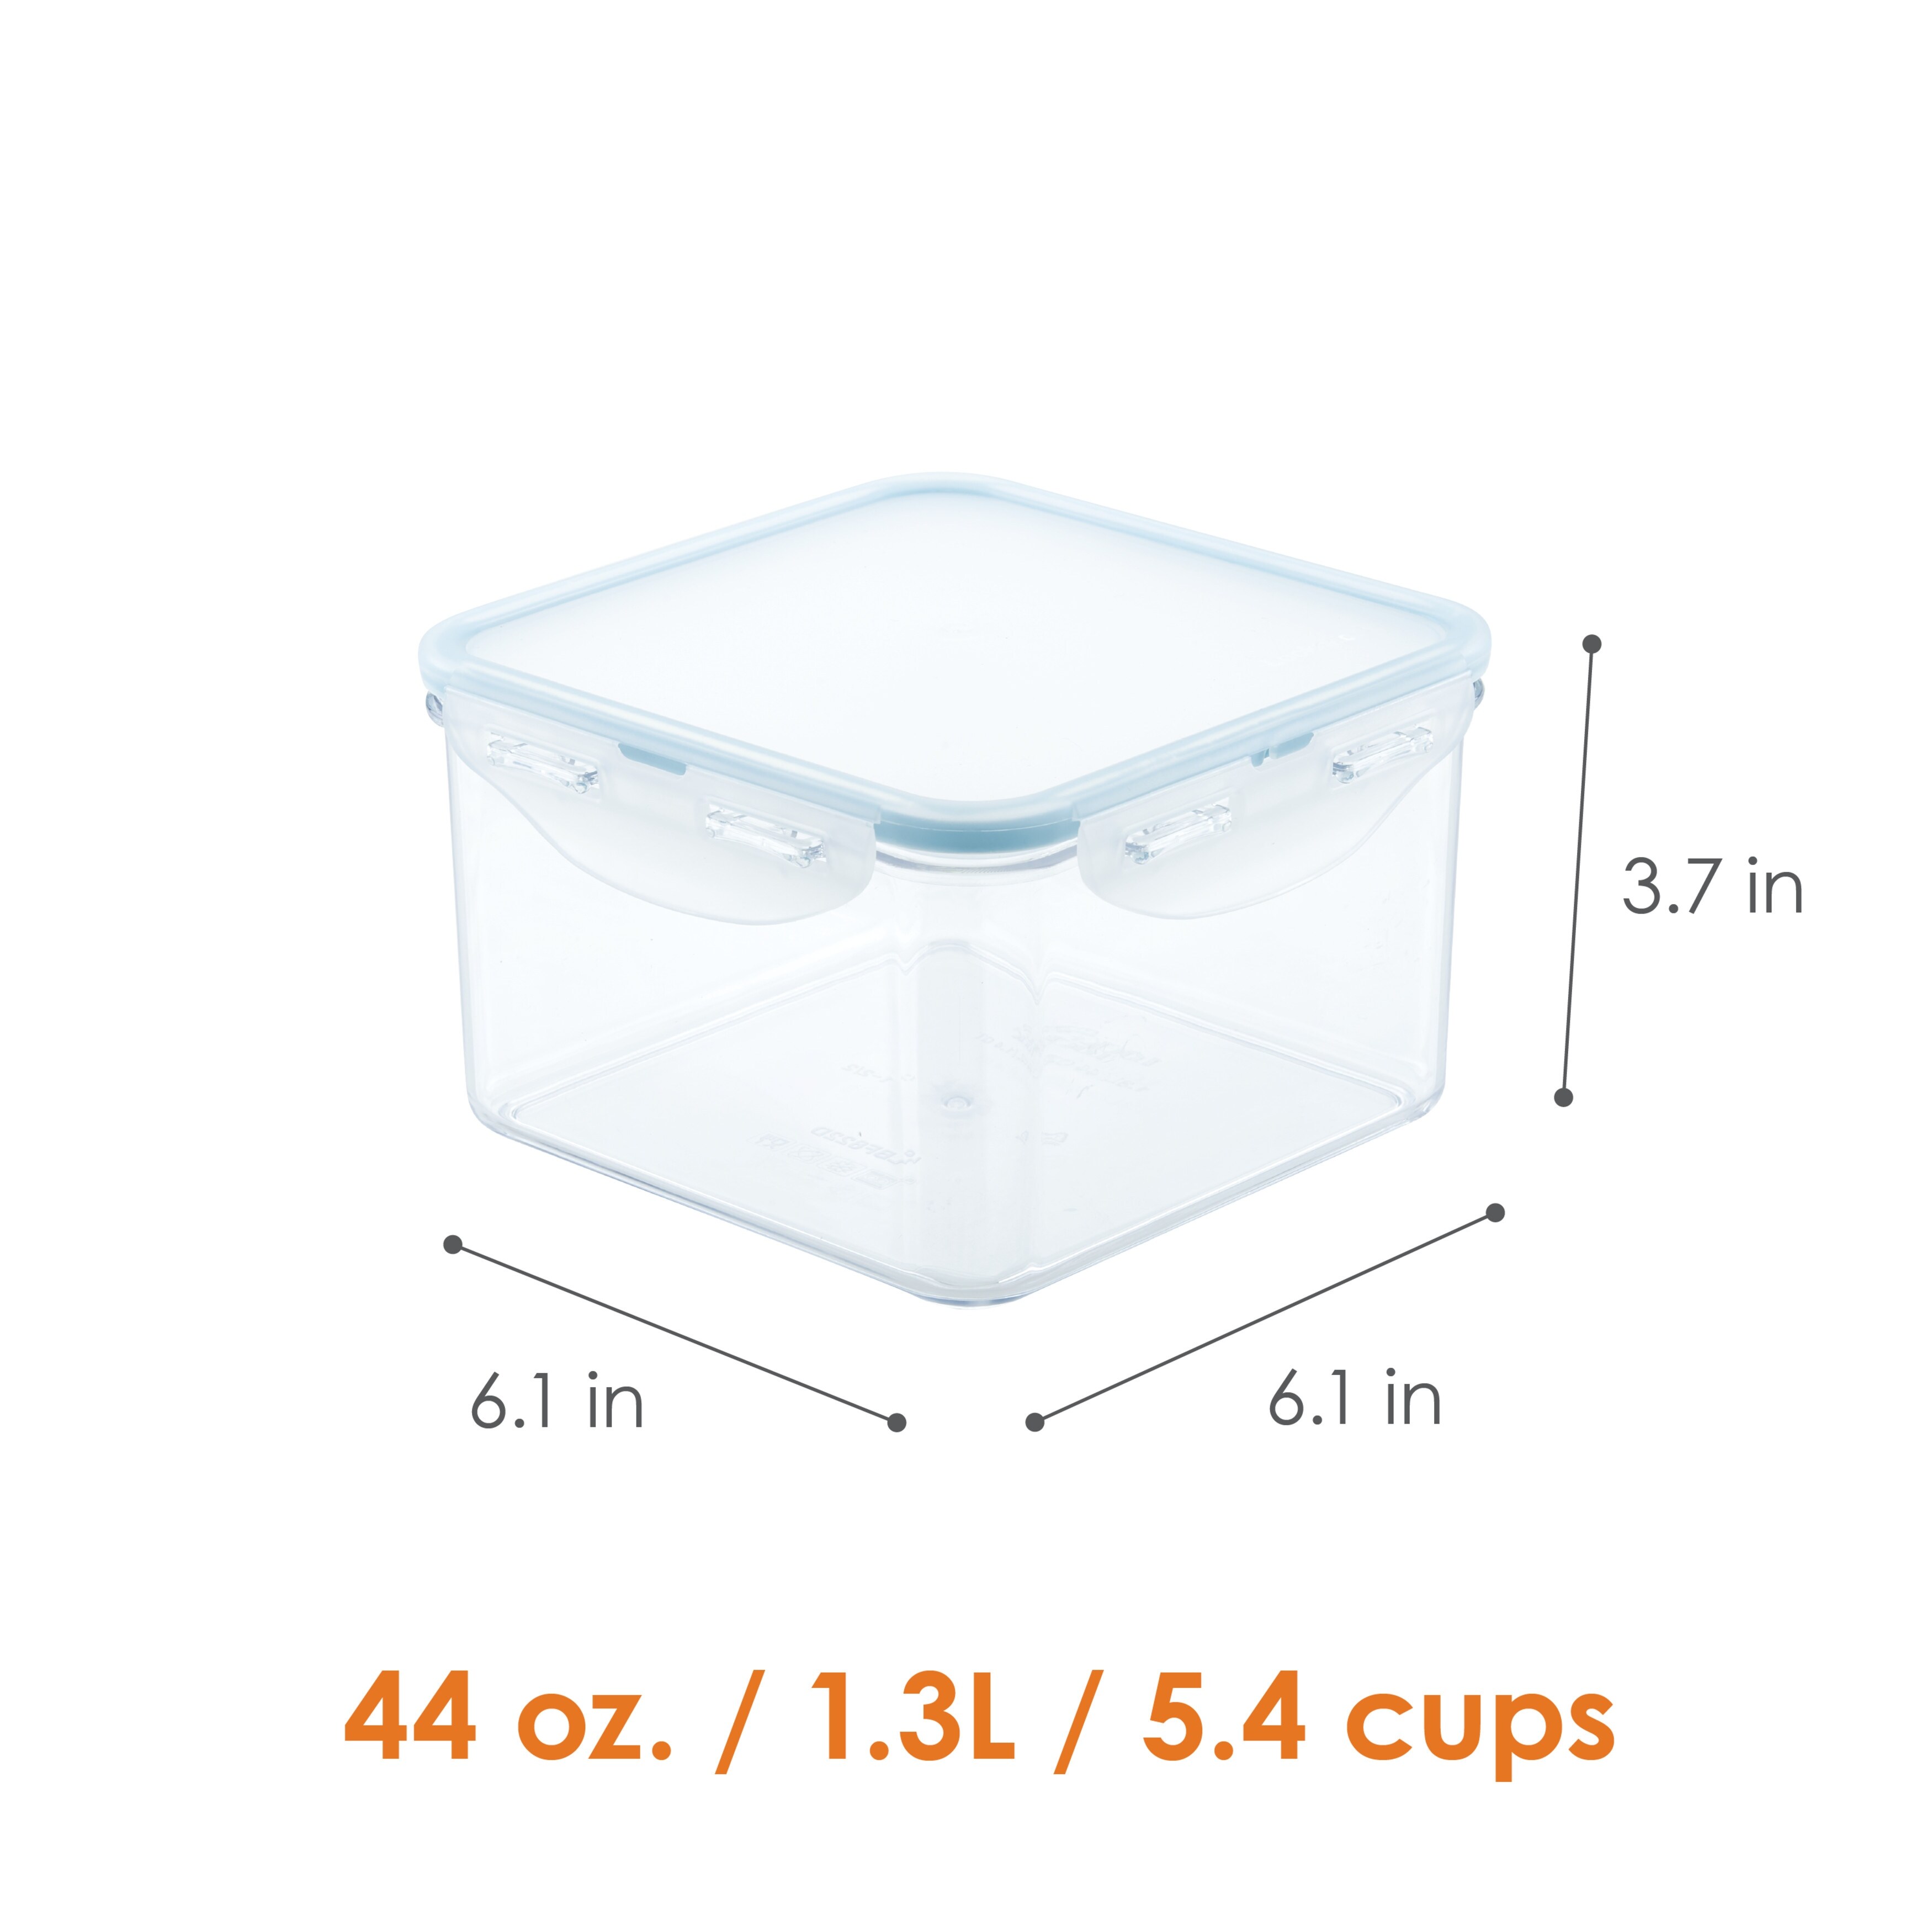 https://ak1.ostkcdn.com/images/products/is/images/direct/09e265f4f36b5bd8d56ae8243088b6f28cb1578b/LocknLock-Purely-Better-Square-Food-Storage-Containers%2C-44-Ounce%2C-Set-of-2.jpg